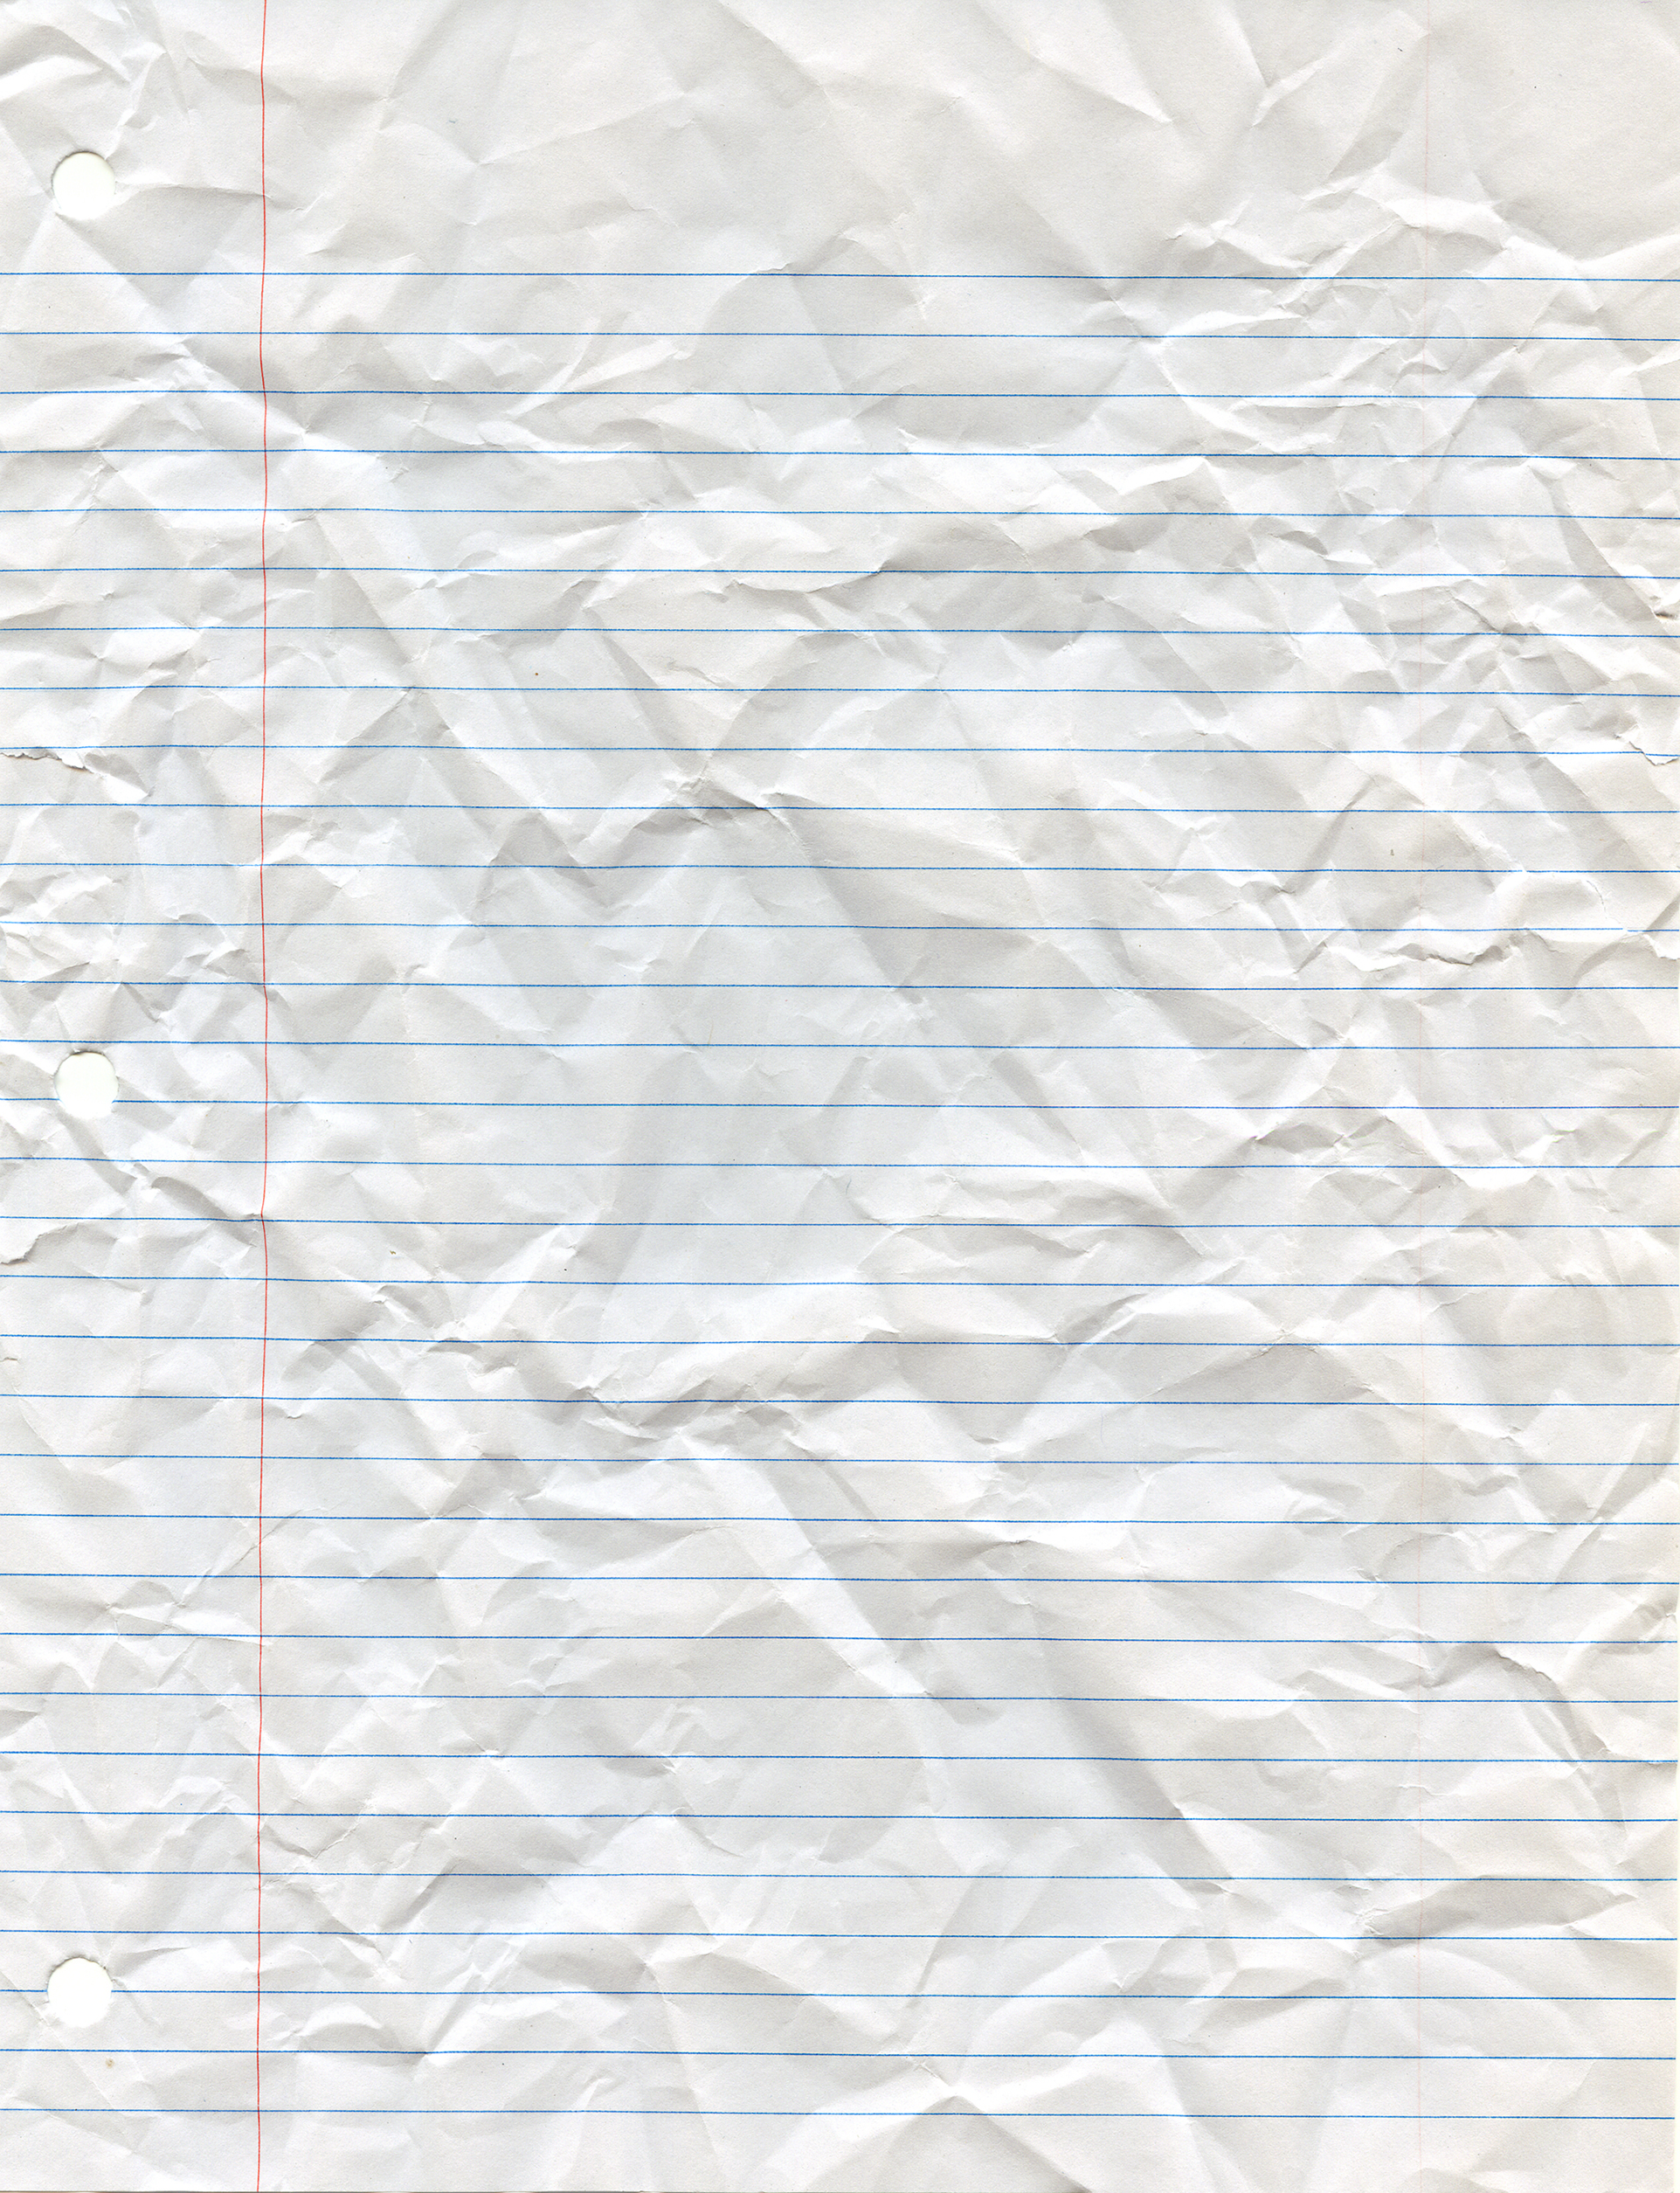 Displaying Image For Crumpled Notebook Paper Background